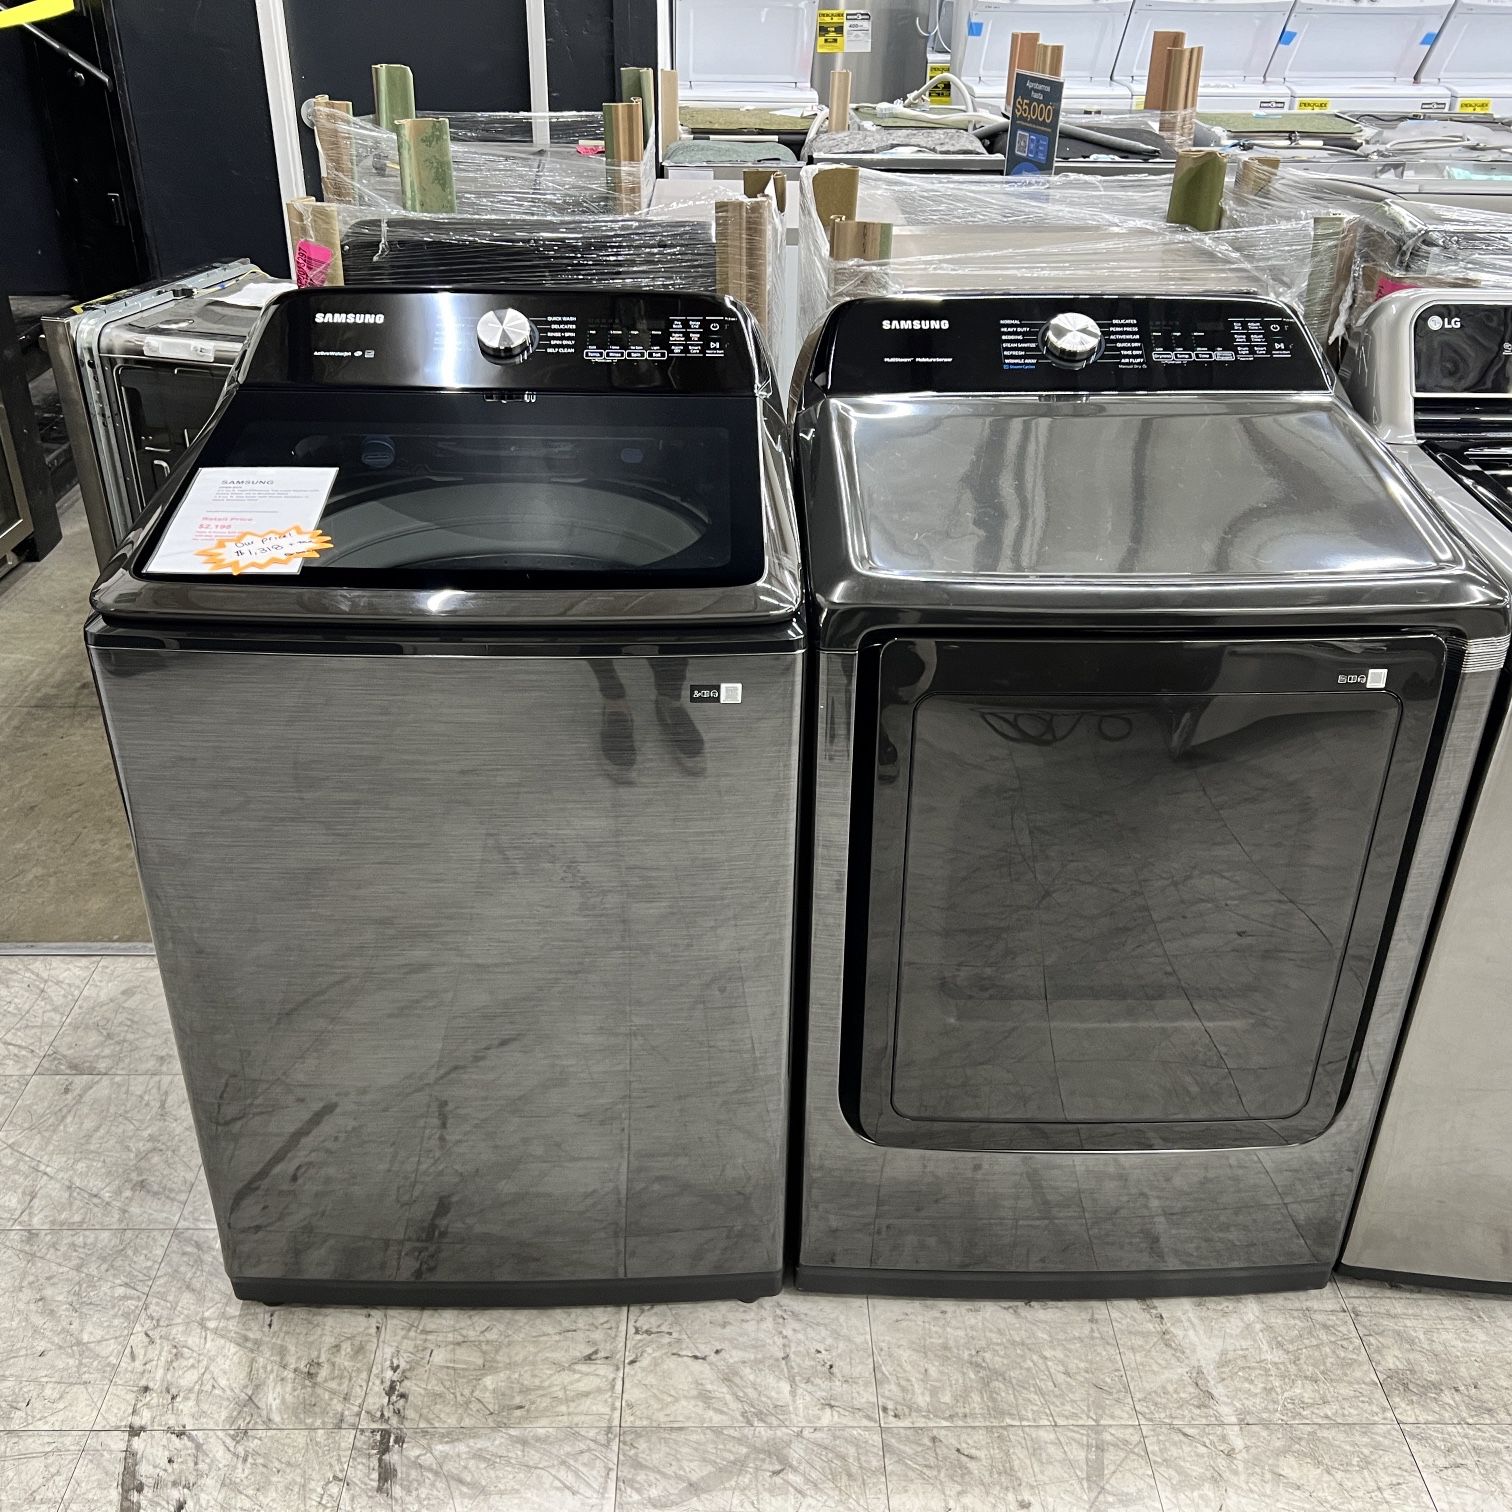 SAMSUNG 5.0 cuft washer and gas dryer black stainless 